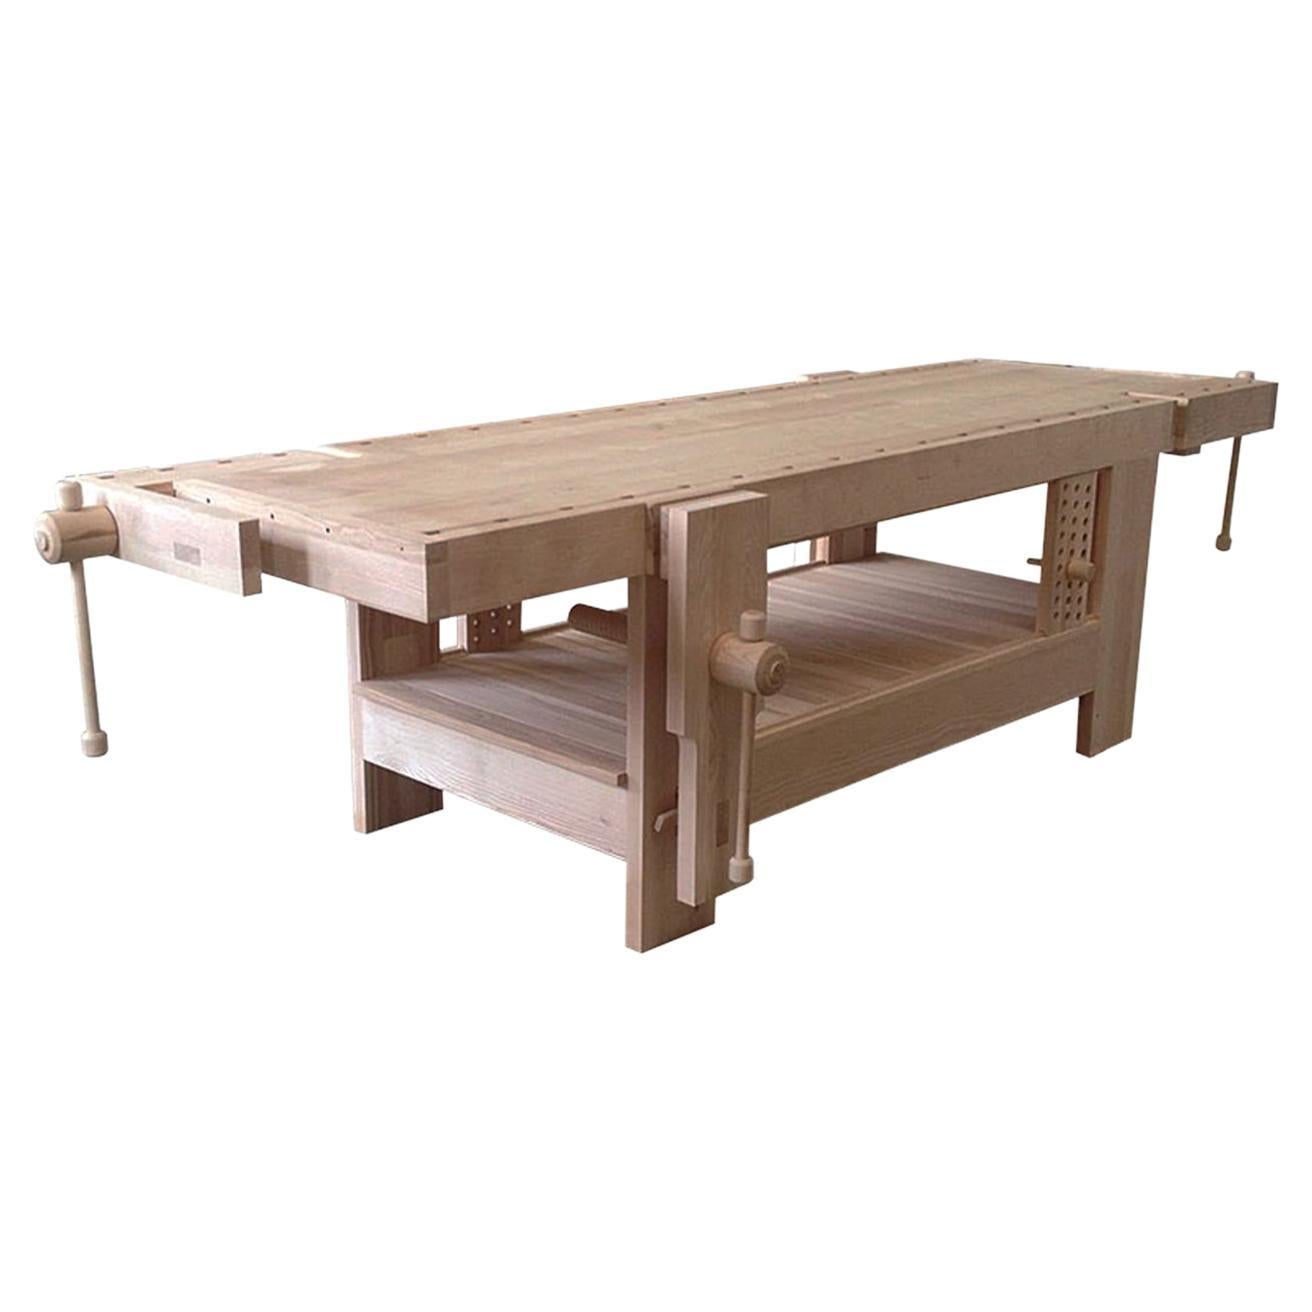 Oroval Carpenter Table For Sale